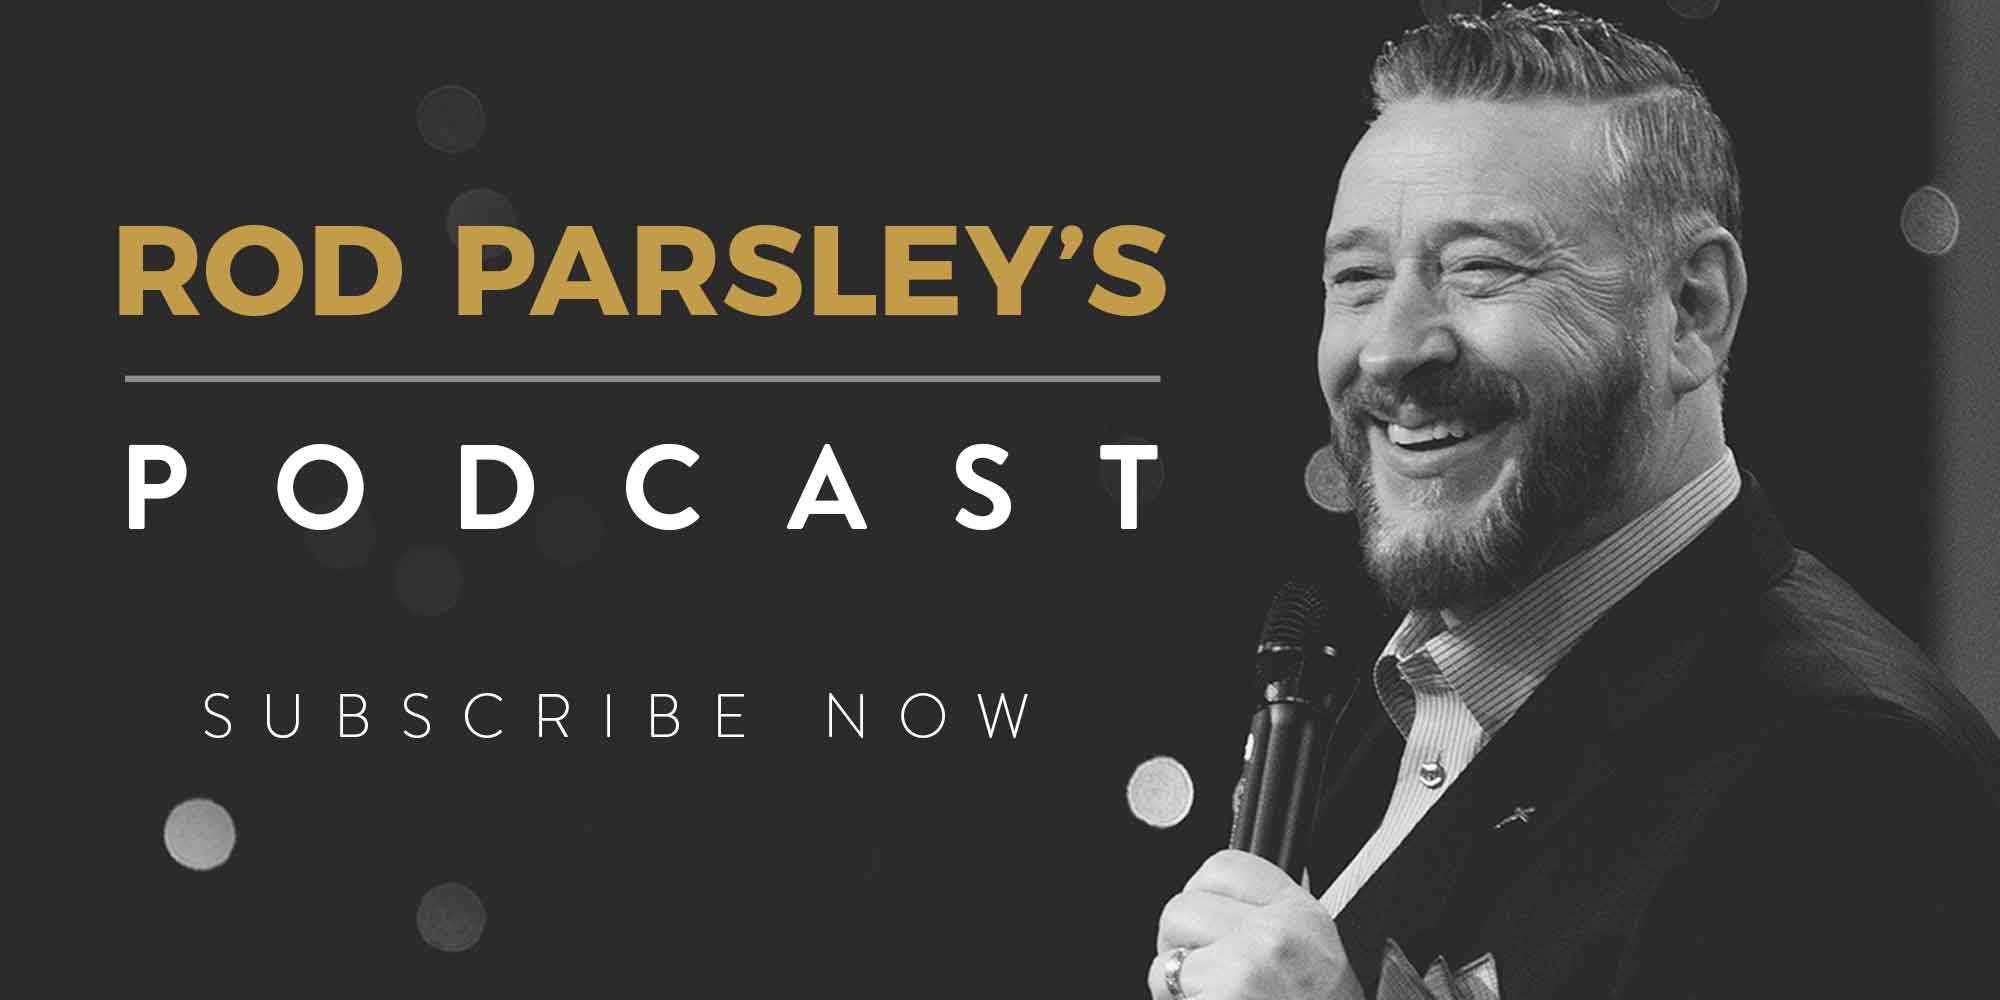 Rod Parsley's Podcast Subscribe Now